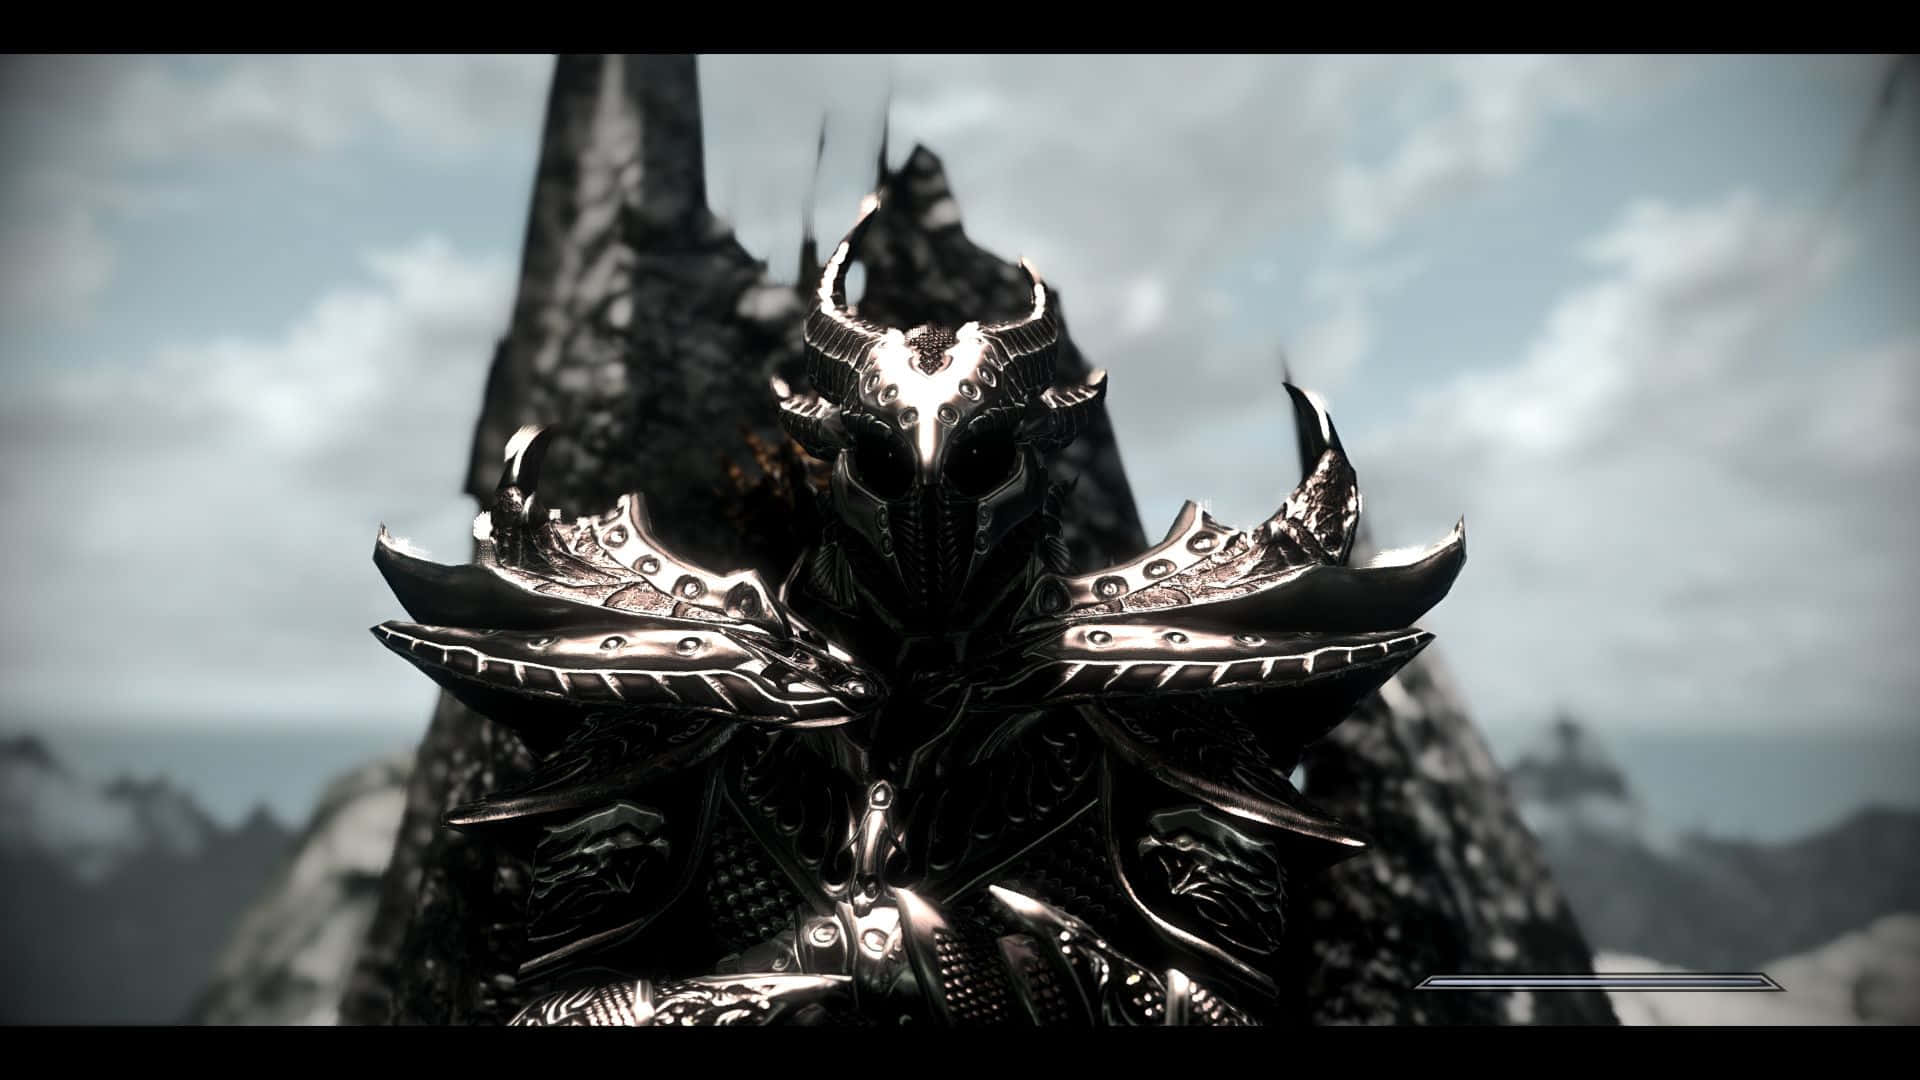 A Daedric Warrior and Weapons Unleashed in The Elder Scrolls V: Skyrim Wallpaper